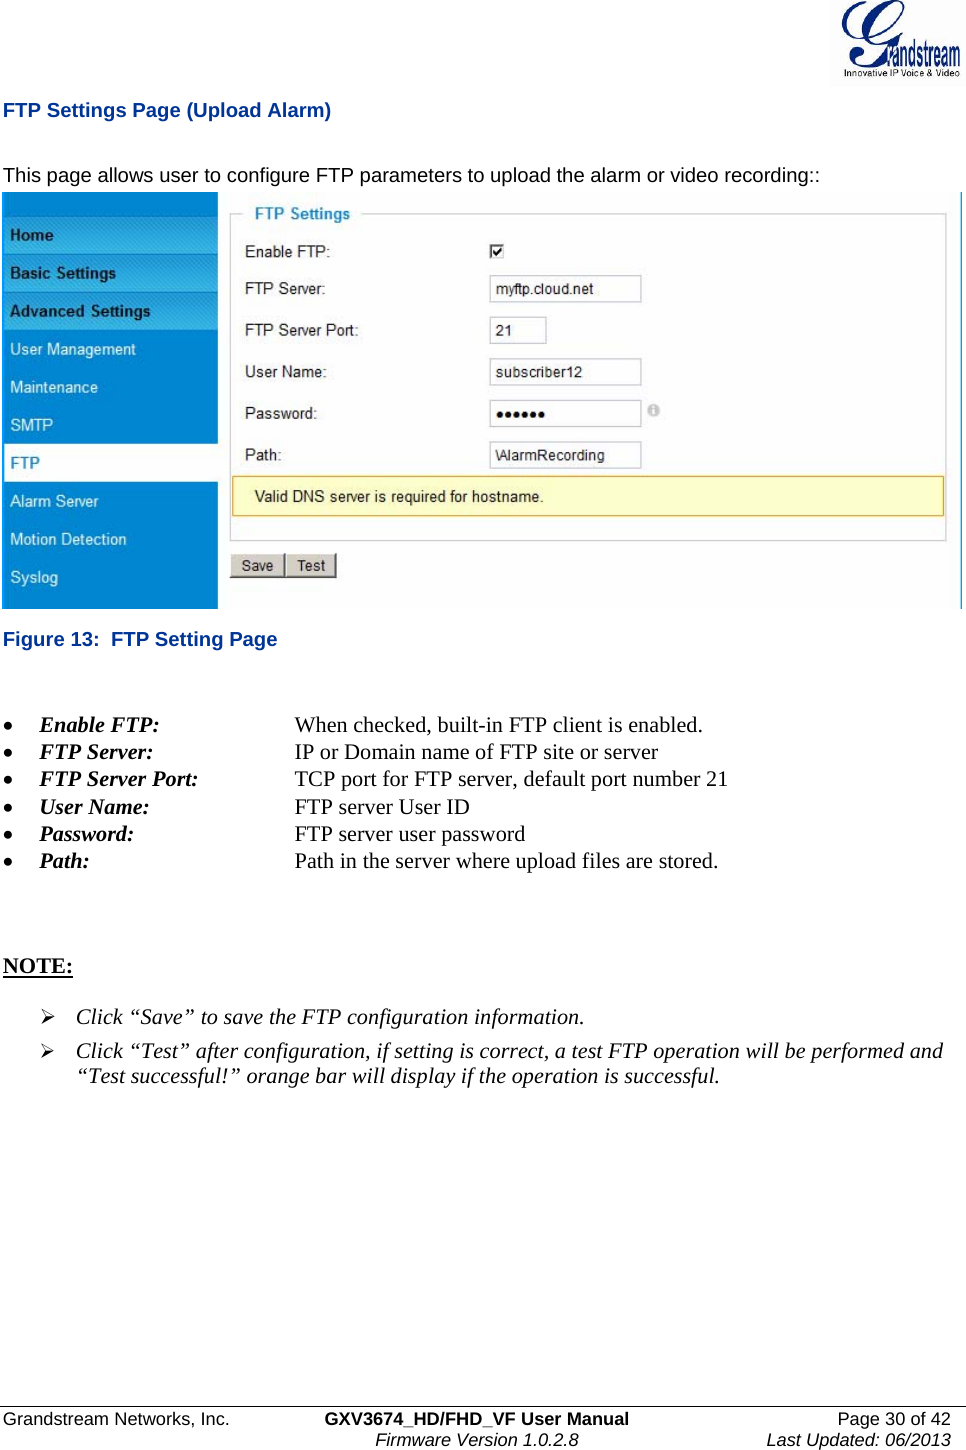  Grandstream Networks, Inc.  GXV3674_HD/FHD_VF User Manual  Page 30 of 42   Firmware Version 1.0.2.8  Last Updated: 06/2013  FTP Settings Page (Upload Alarm)  This page allows user to configure FTP parameters to upload the alarm or video recording::  Figure 13:  FTP Setting Page  • Enable FTP:    When checked, built-in FTP client is enabled.  • FTP Server:    IP or Domain name of FTP site or server • FTP Server Port:    TCP port for FTP server, default port number 21 • User Name:    FTP server User ID • Password:      FTP server user password • Path:      Path in the server where upload files are stored.     NOTE:   ¾ Click “Save” to save the FTP configuration information. ¾ Click “Test” after configuration, if setting is correct, a test FTP operation will be performed and “Test successful!” orange bar will display if the operation is successful.  